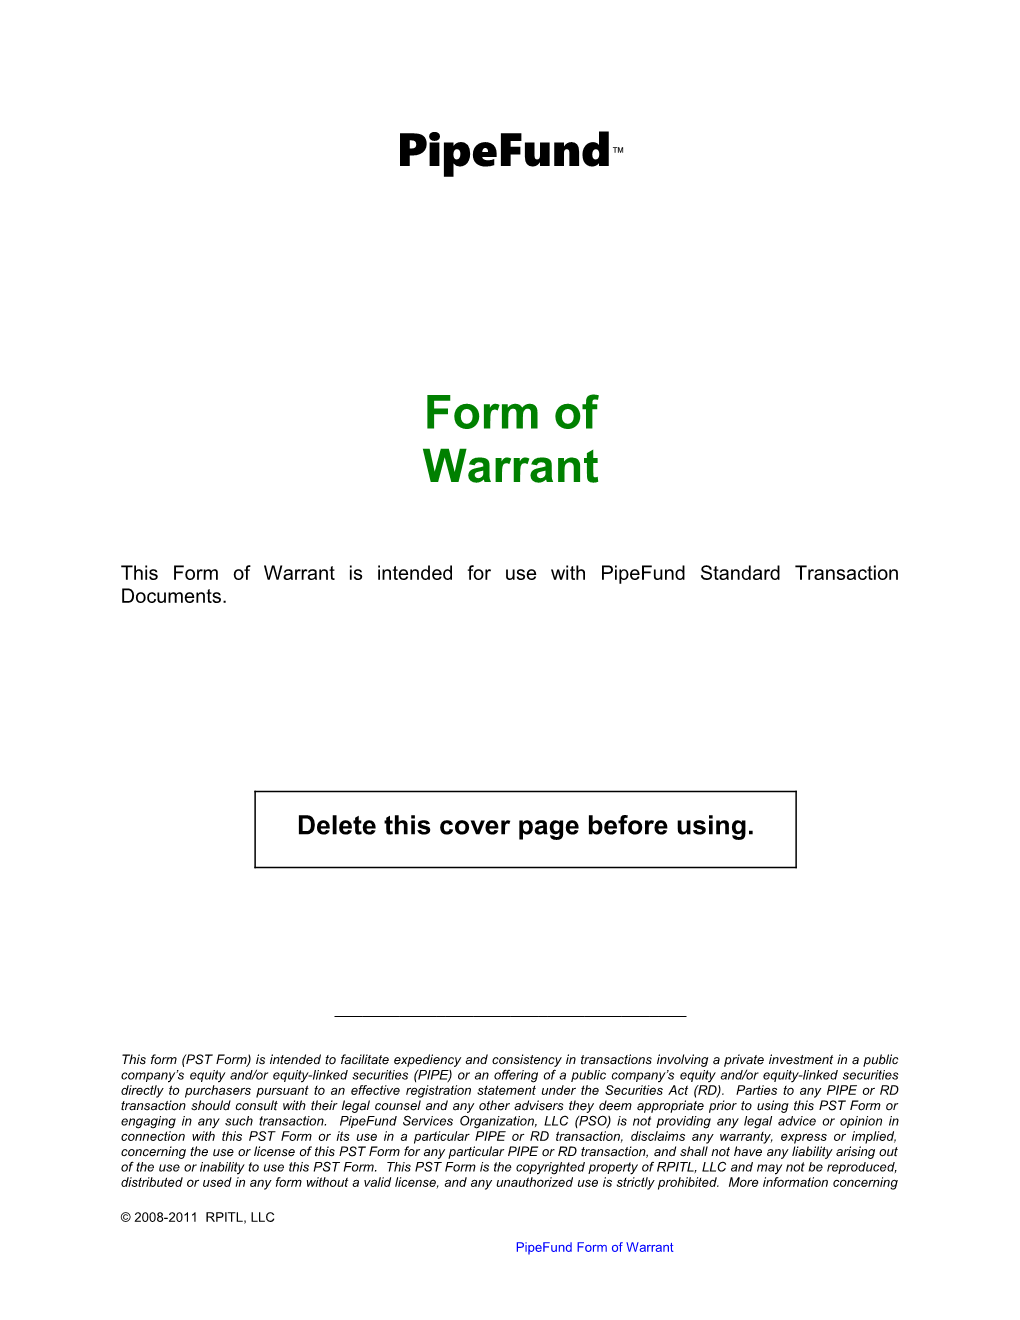 This Form of Warrant Is Intended for Use with Pipefundstandard Transaction Documents